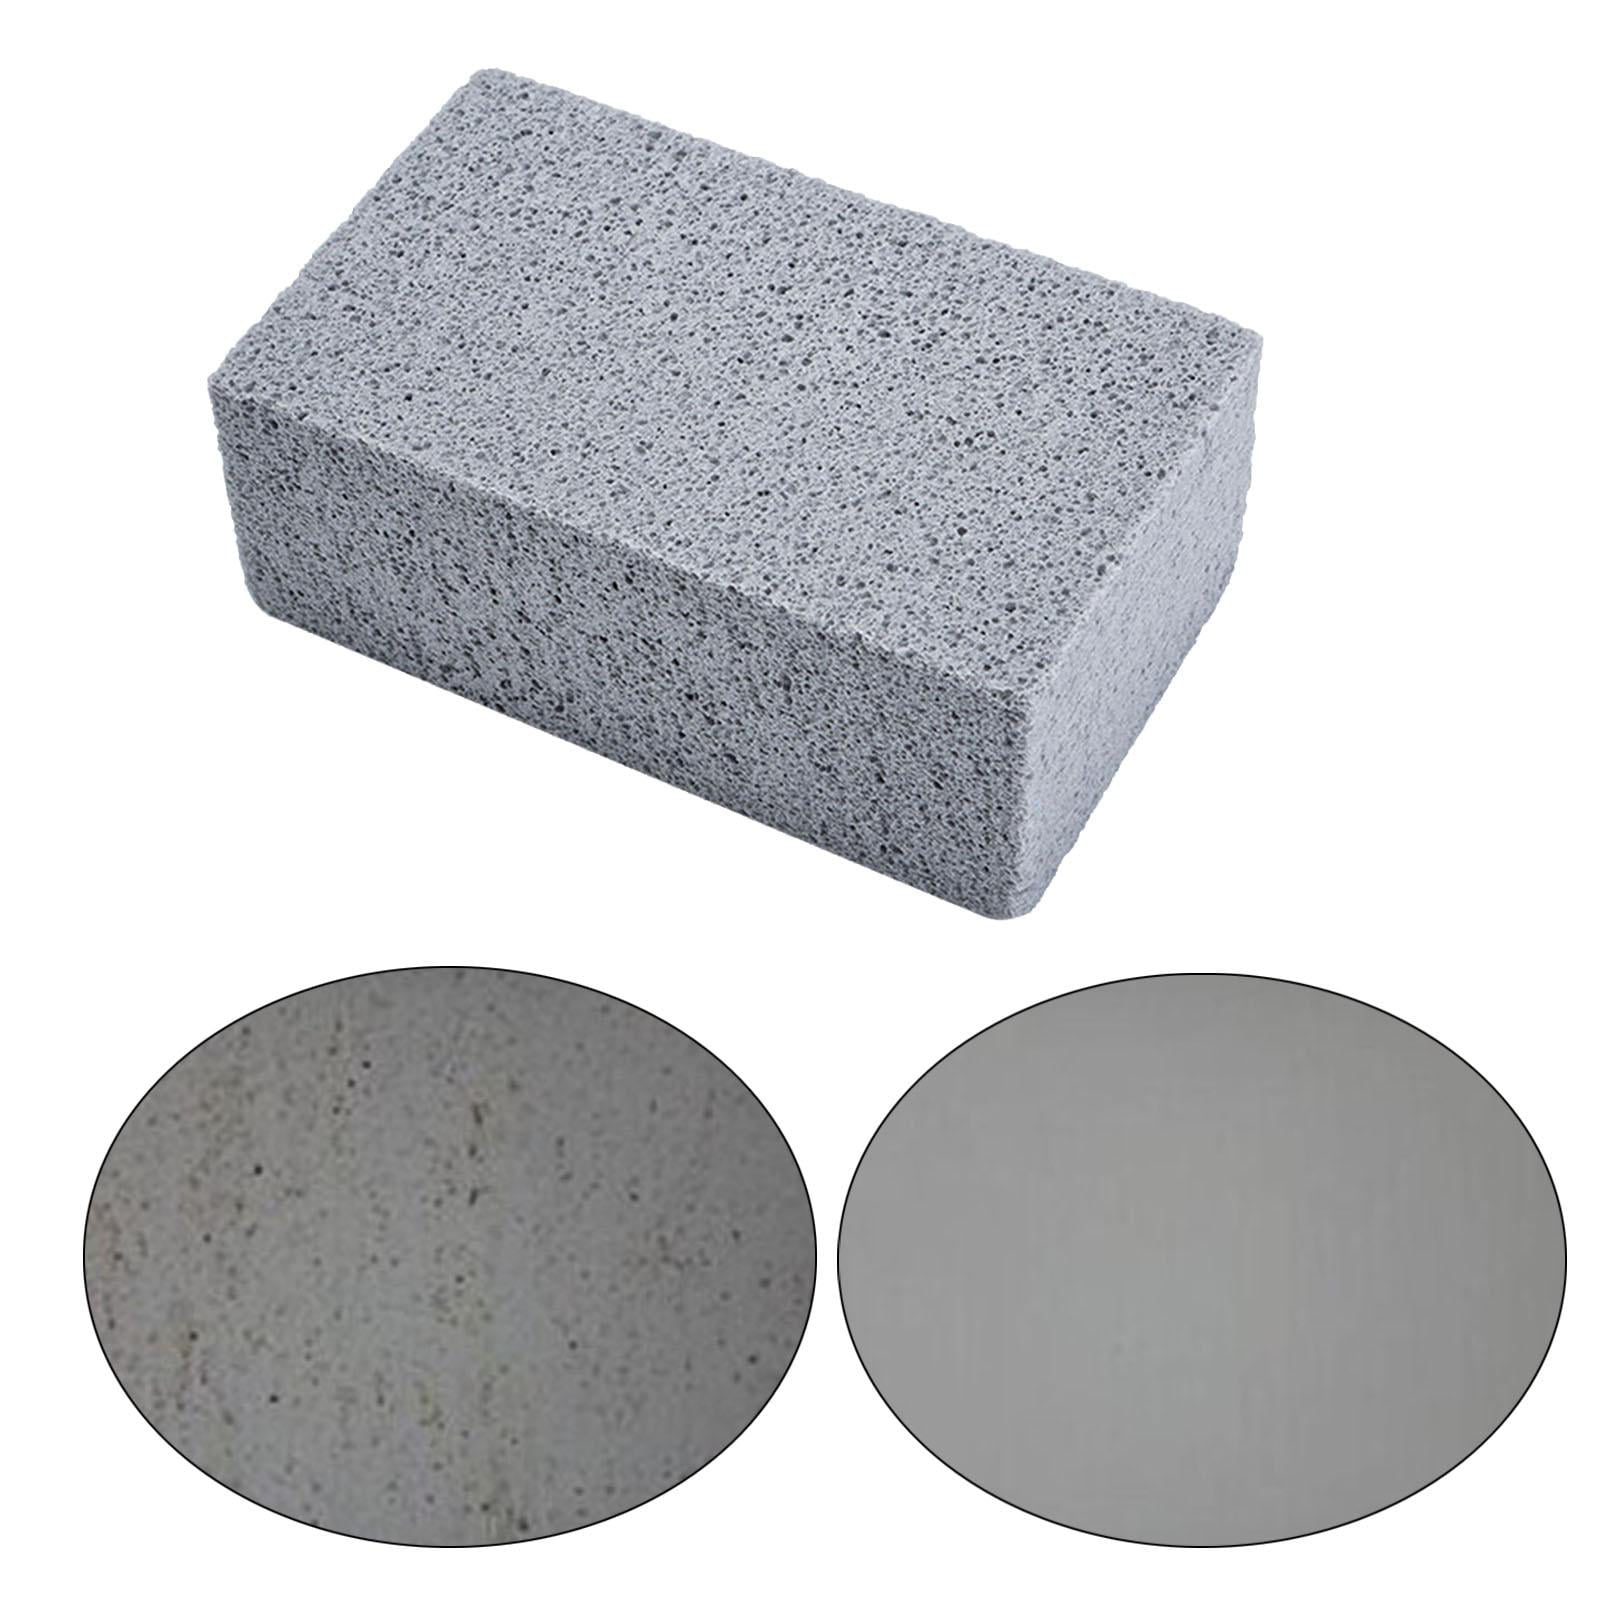 BBQ Scraper griddle Cleaning Pumice Stone Block Griddle Cleaner Grill Brick 